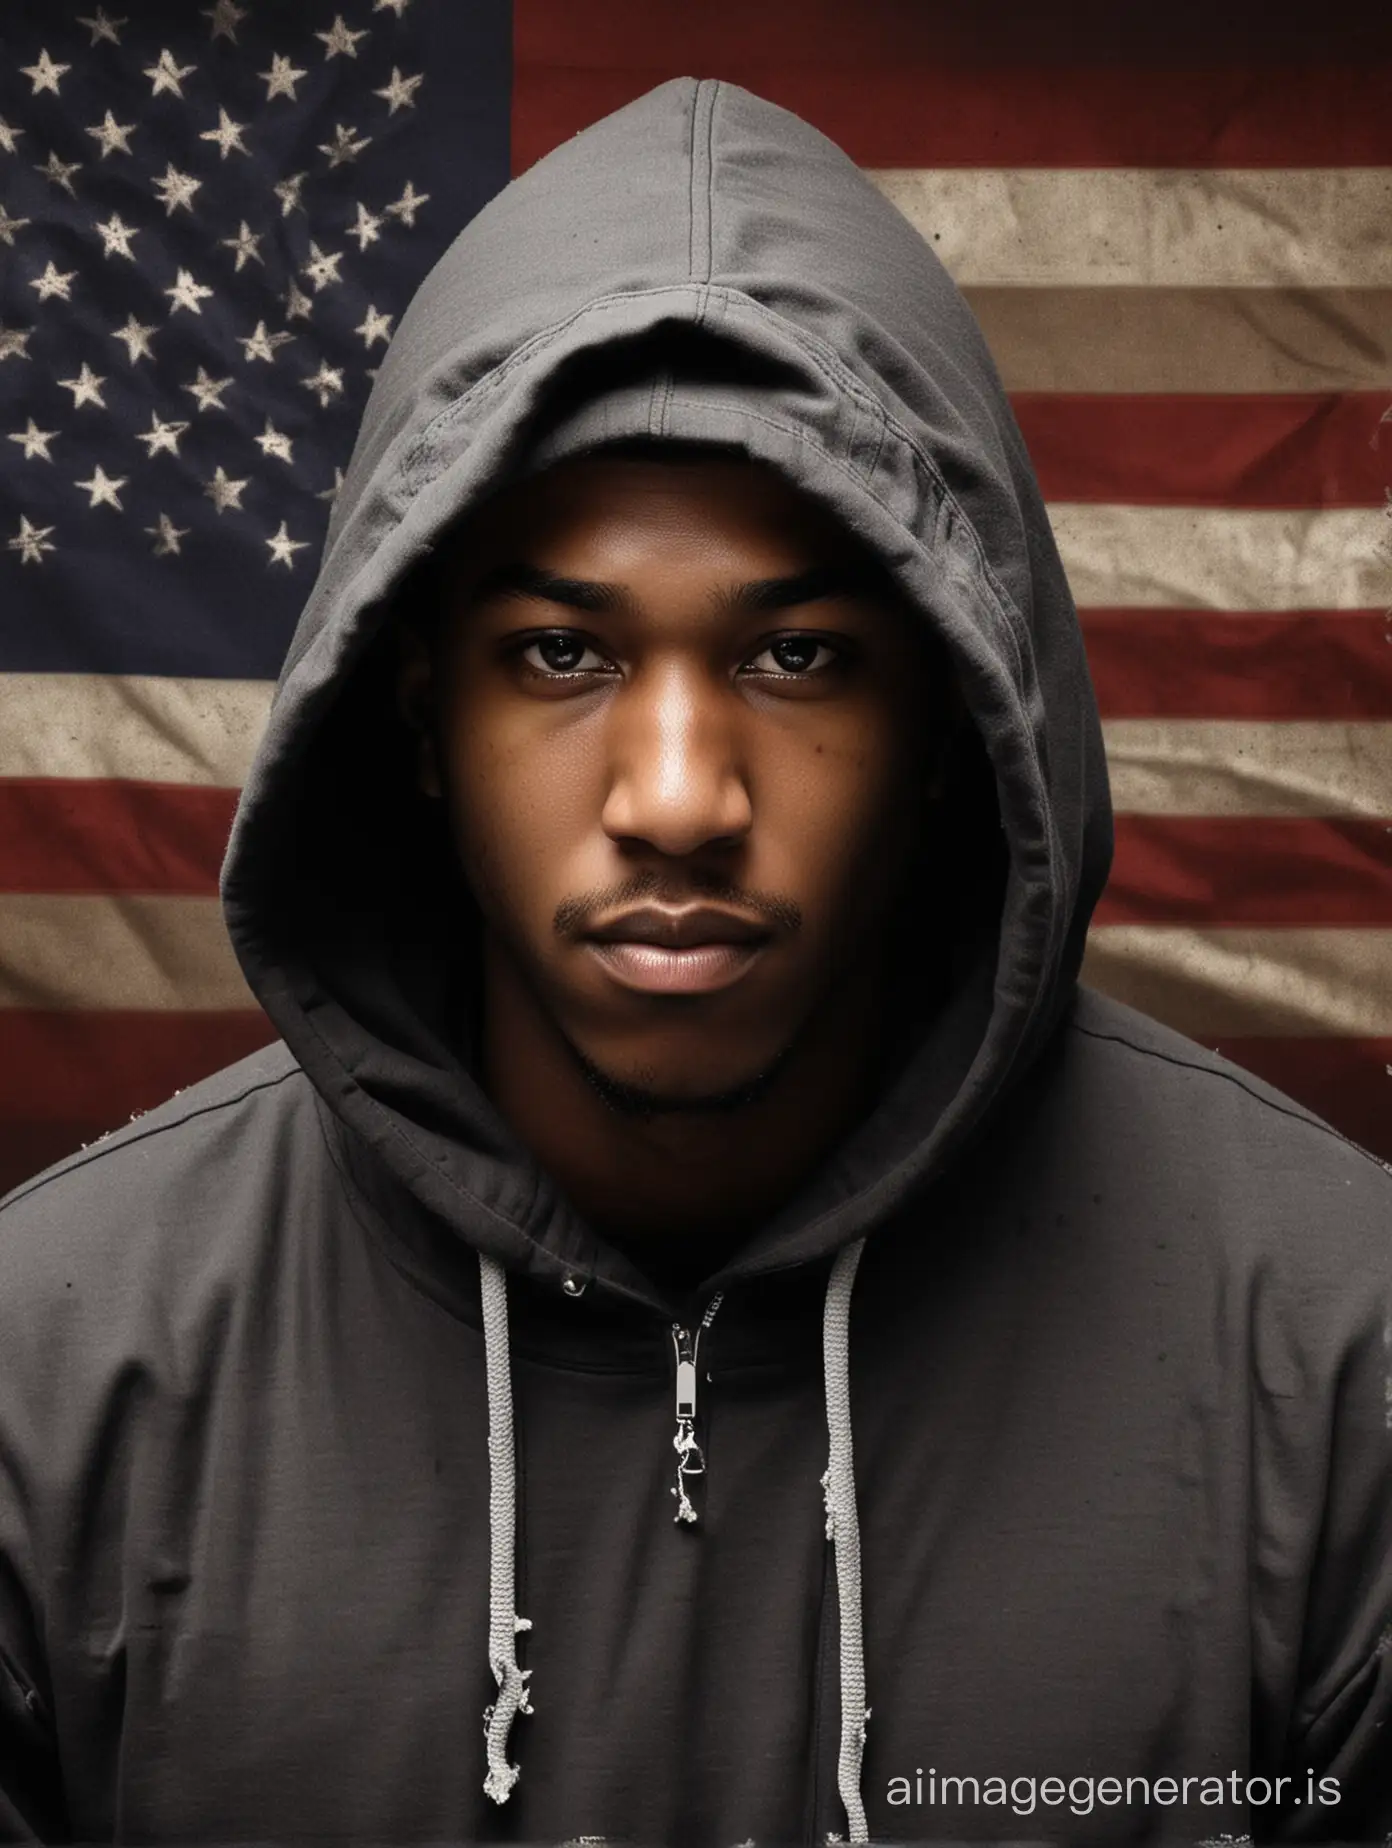 sad Trayvon Martin in a hoodie, in front of tattered American flag